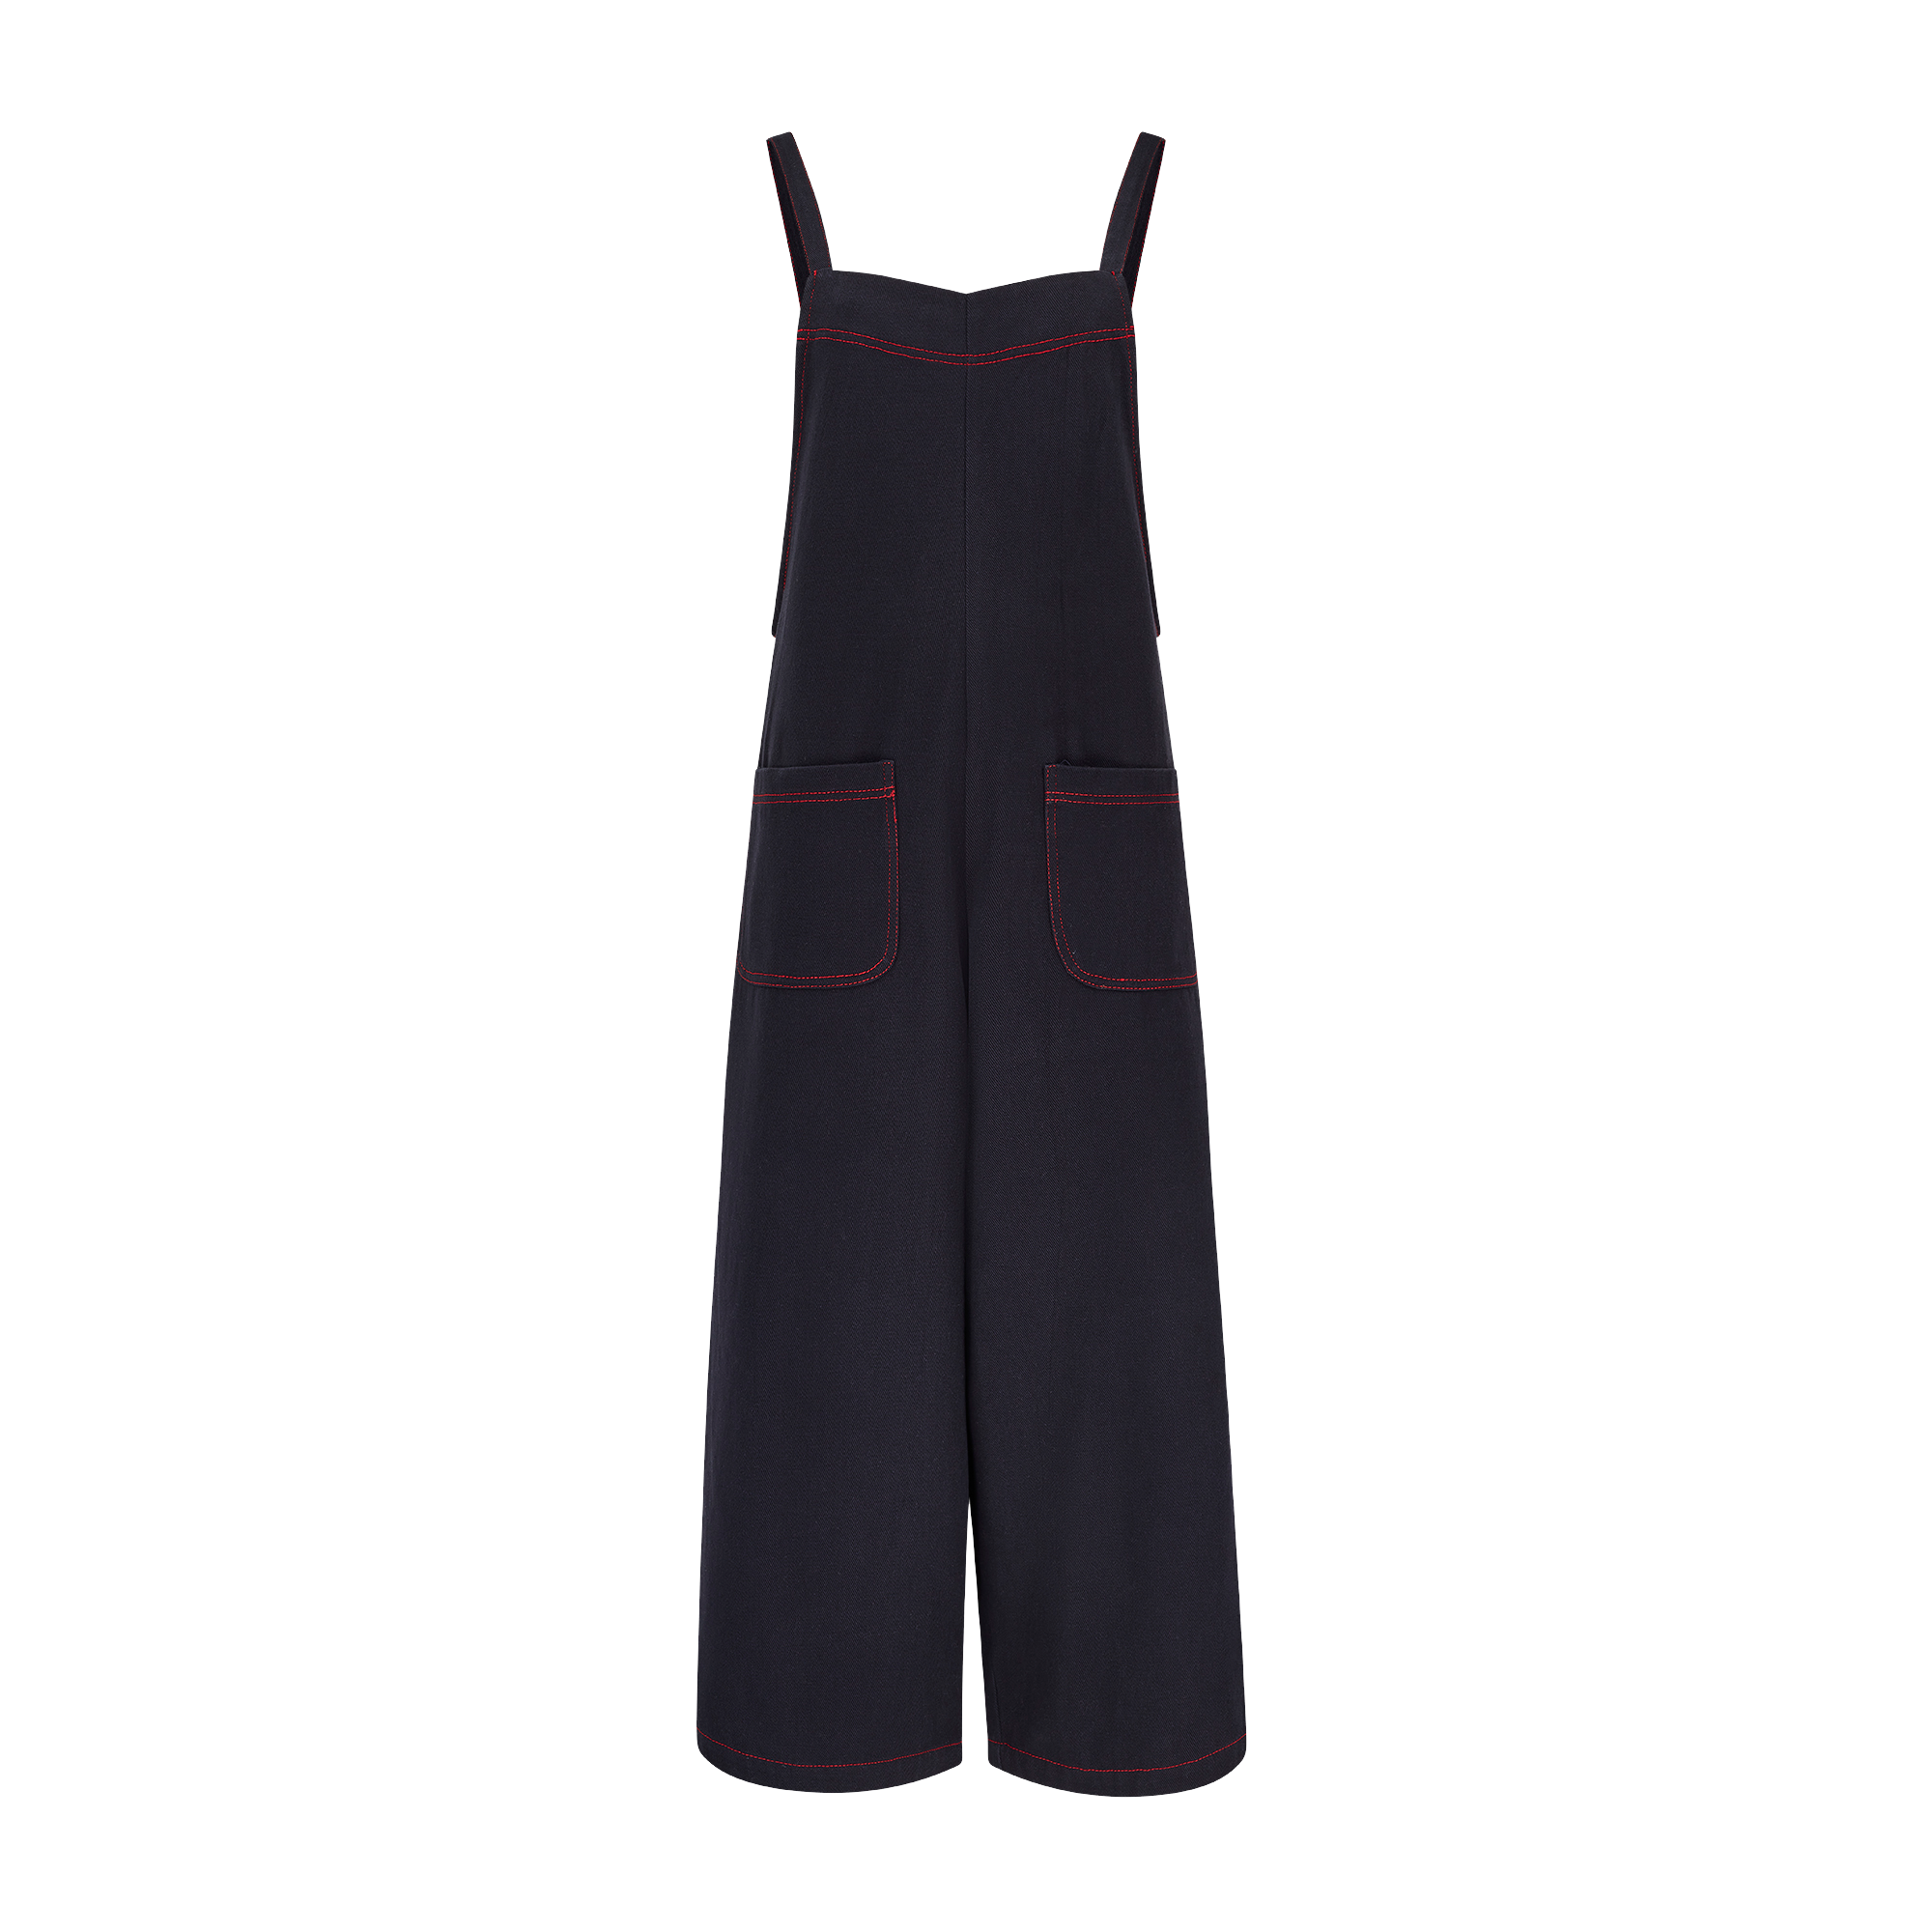 The Dungarees